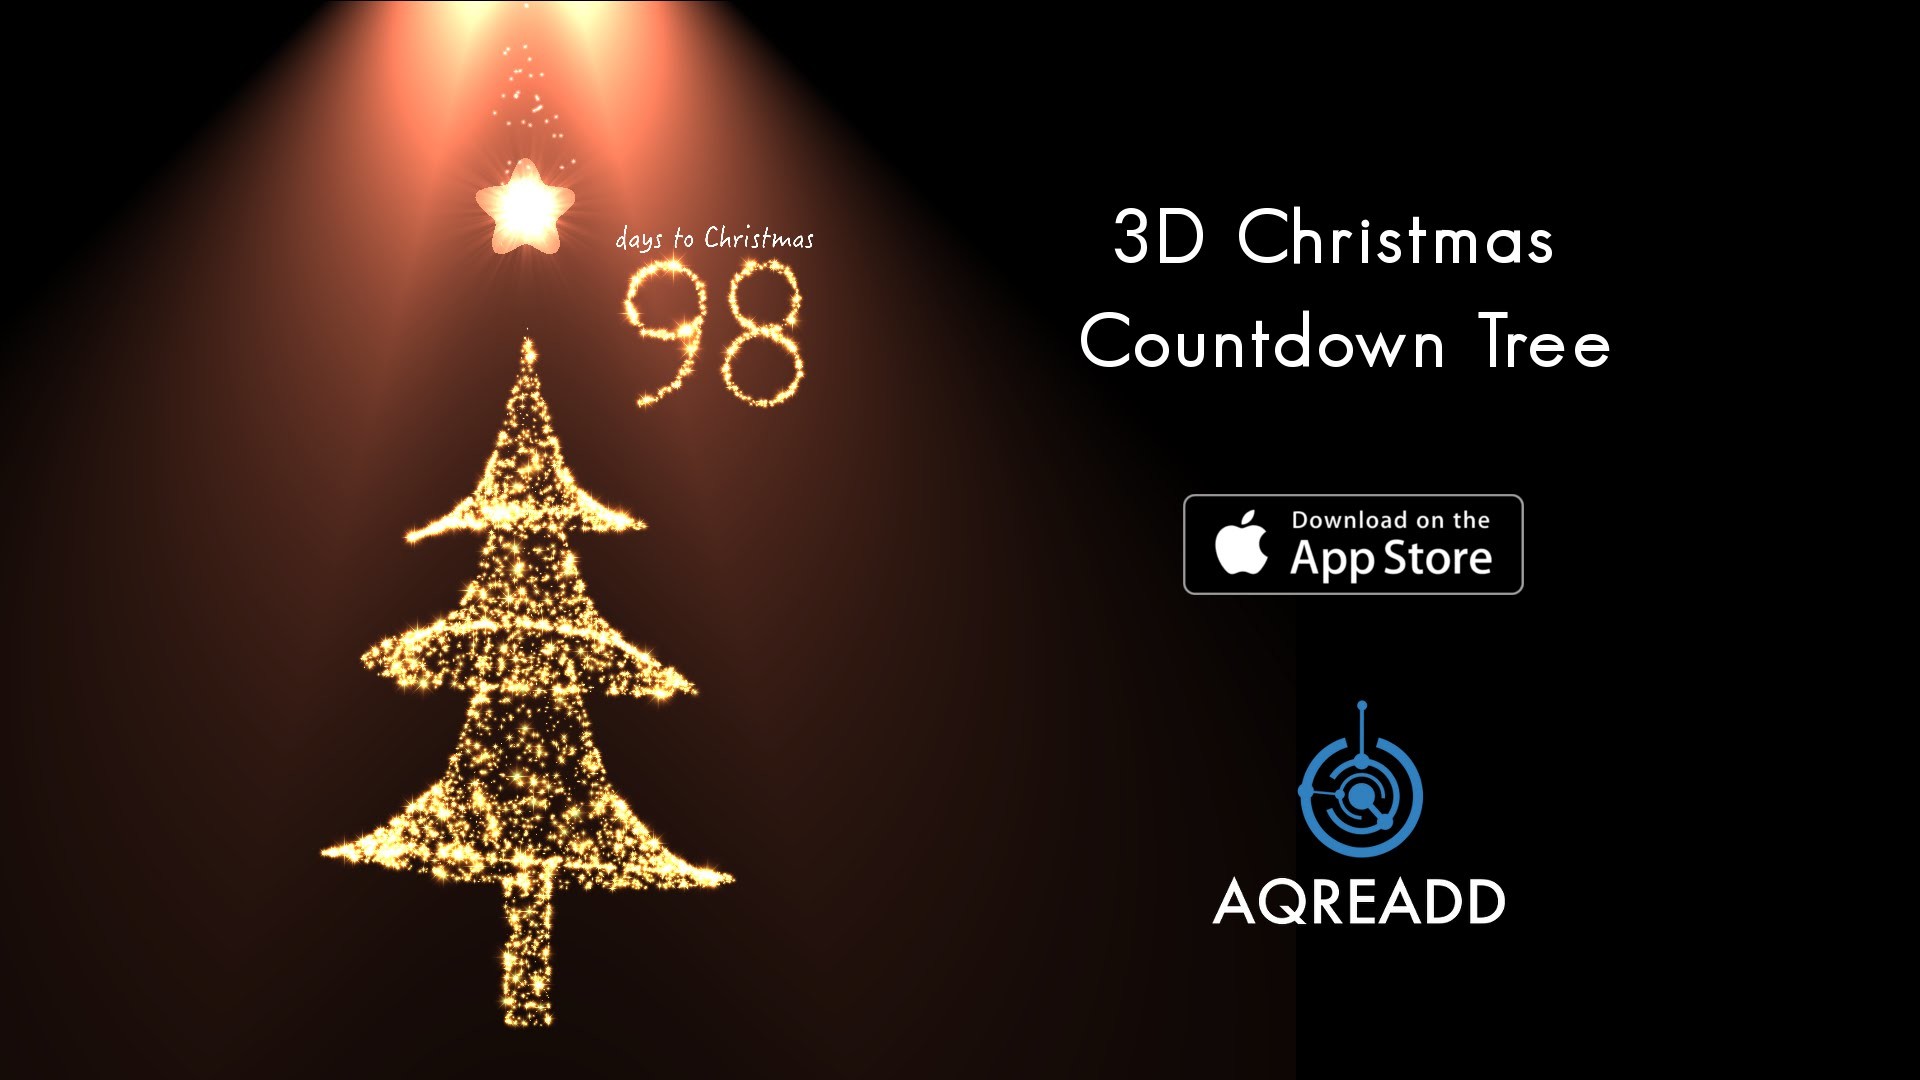 1920x1080 3D Christmas Countdown Tree for iPhone 6, iPhone 6 plus, iPhone 5s & iPad -  YouTube